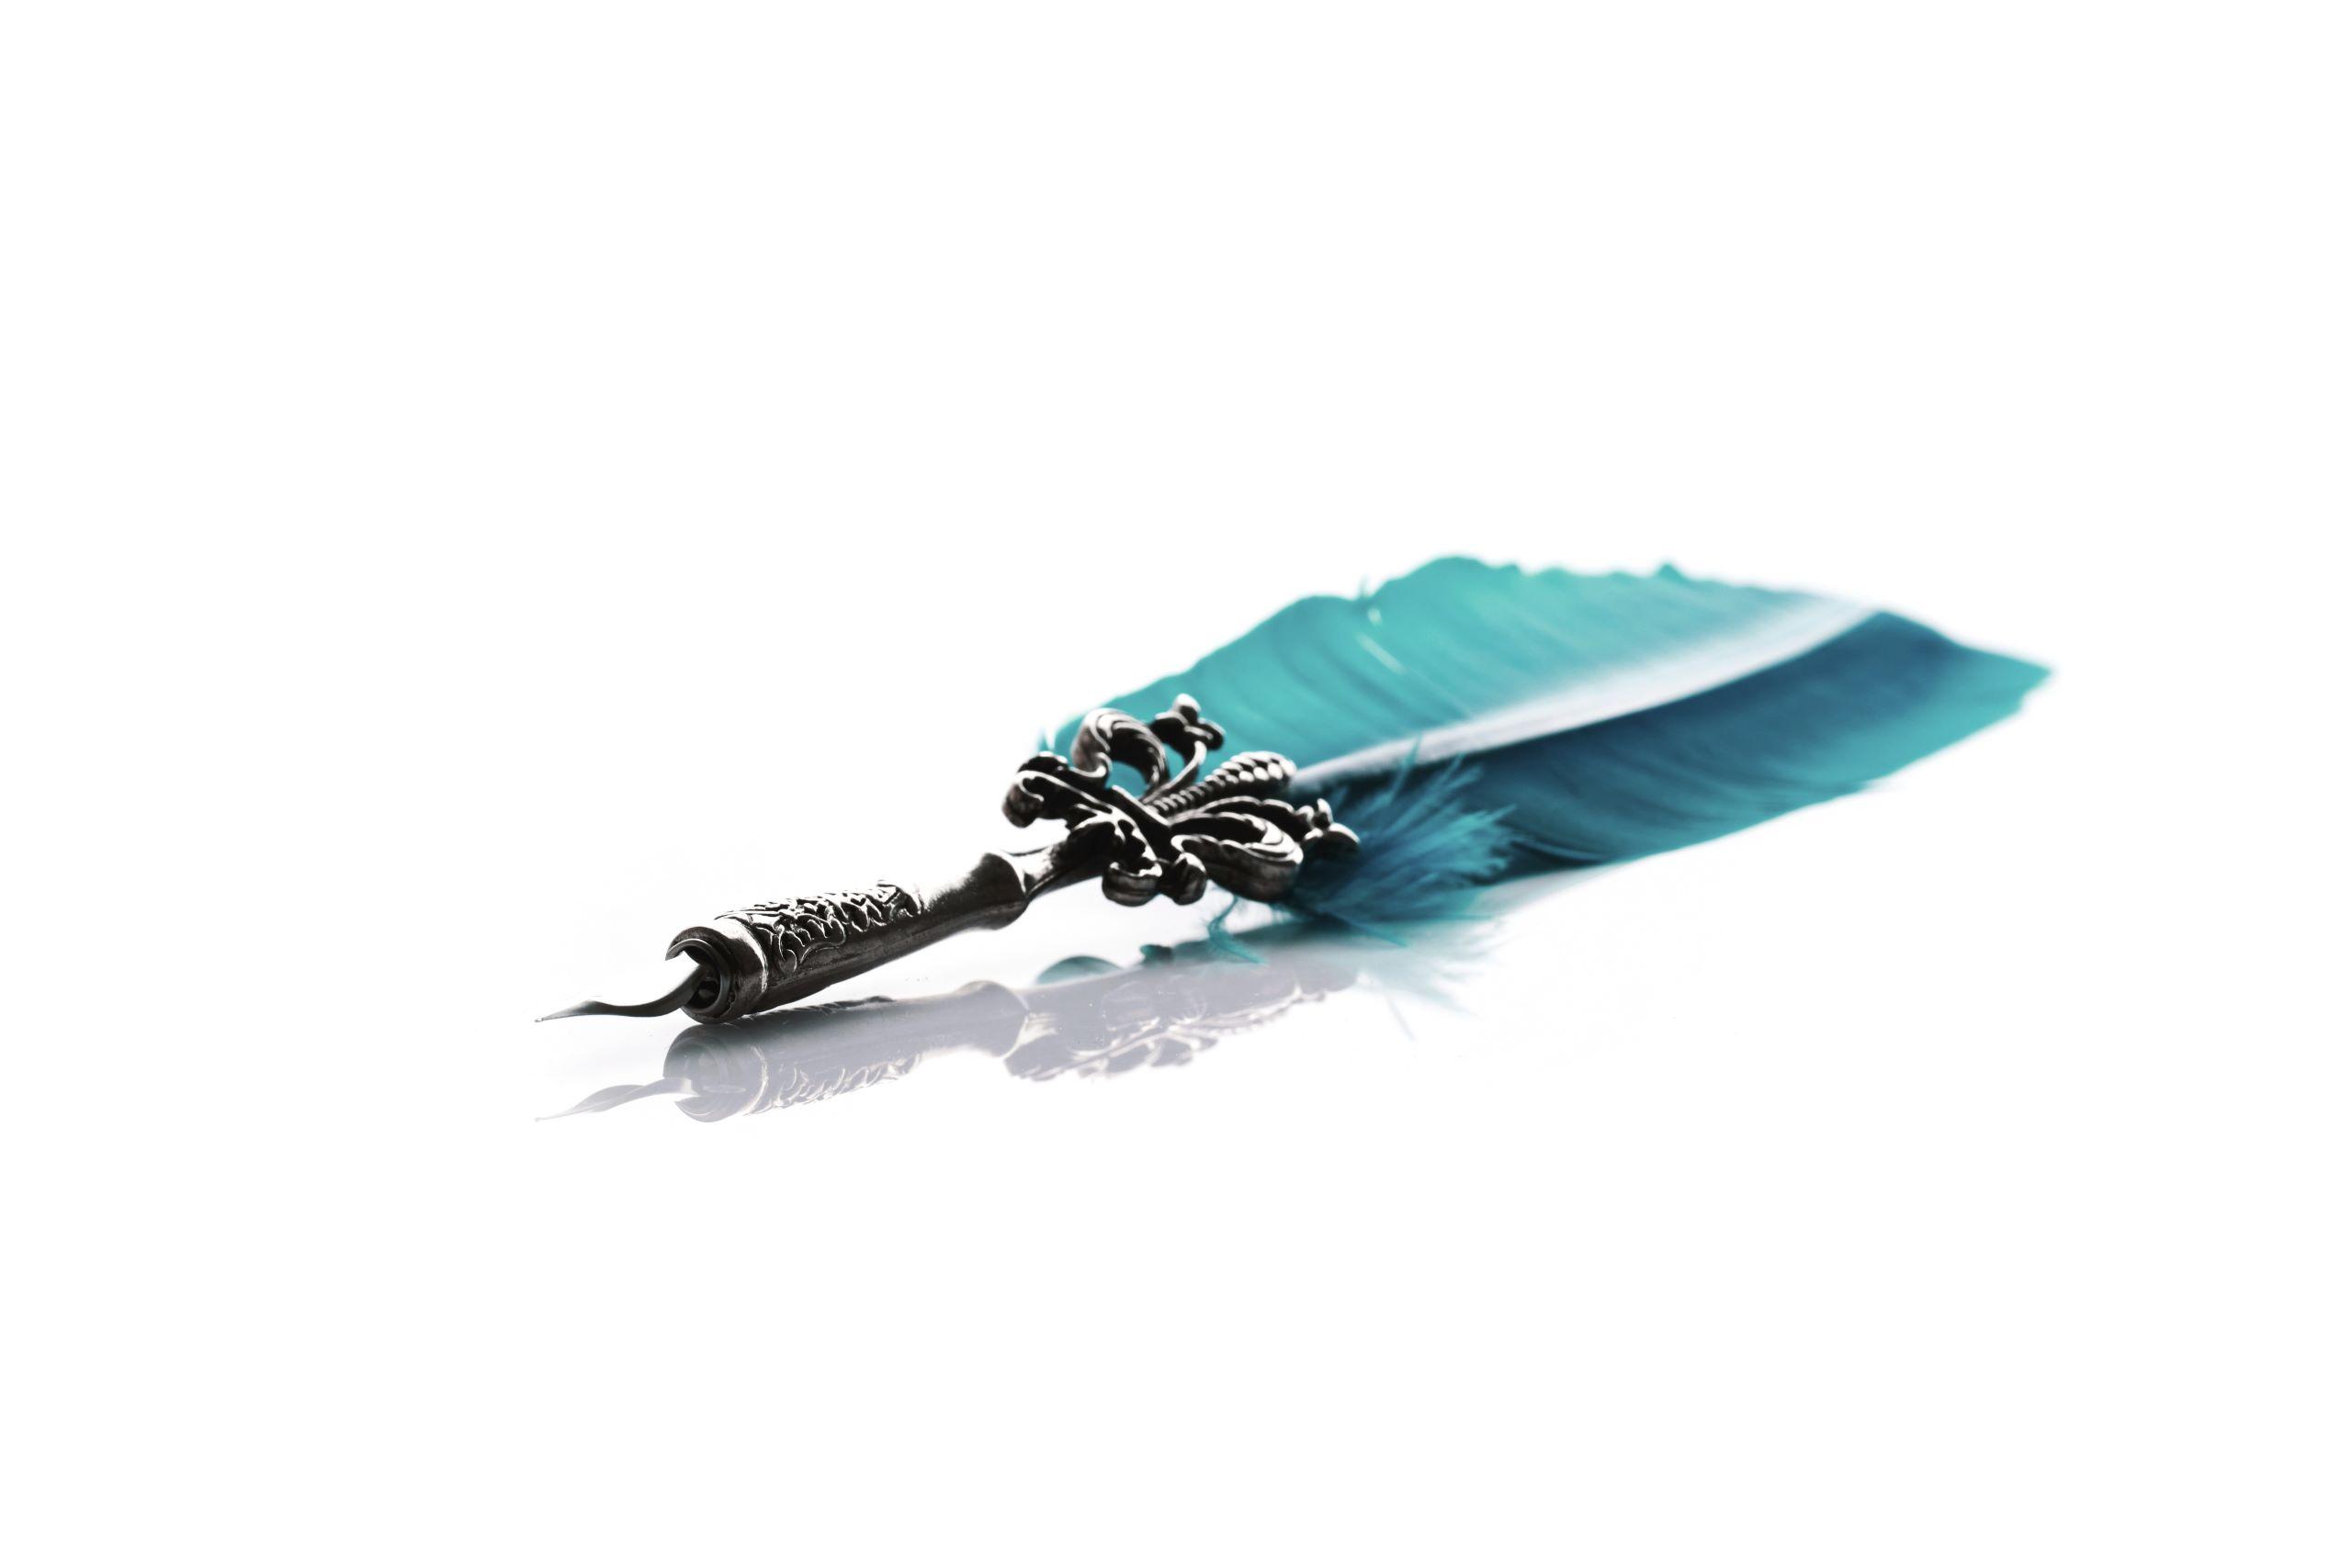 A decorative quill pen features a bright teal feather as its top.